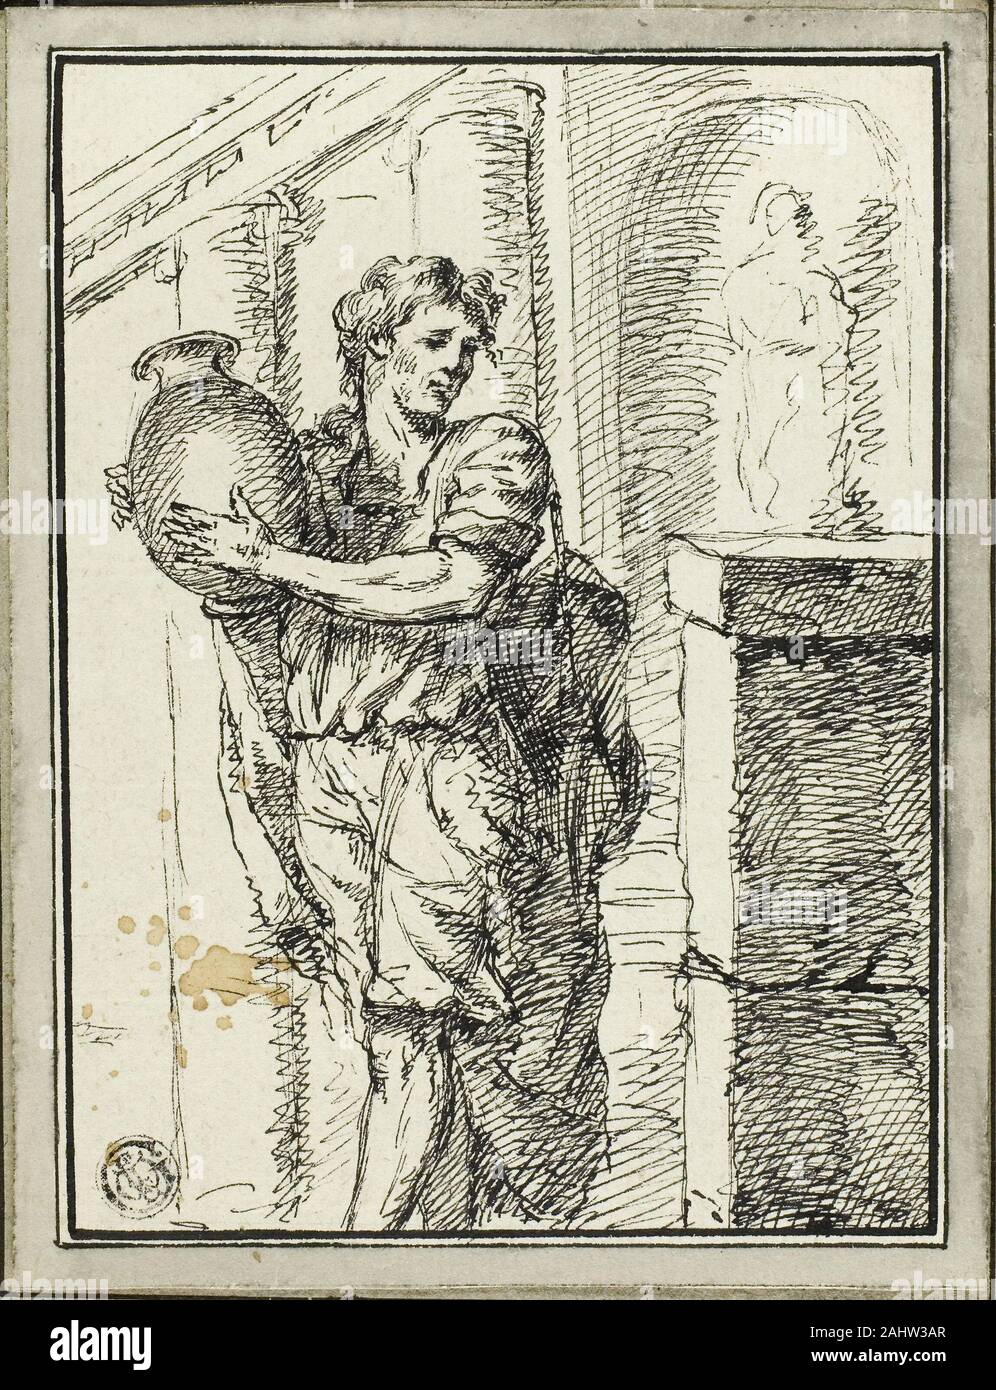 David Pierre Giottino Humbert de Superville. Man Holding Jar. 1785. Holland. Pen and black ink on ivory laid paper, tipped onto gray laid paper Stock Photo